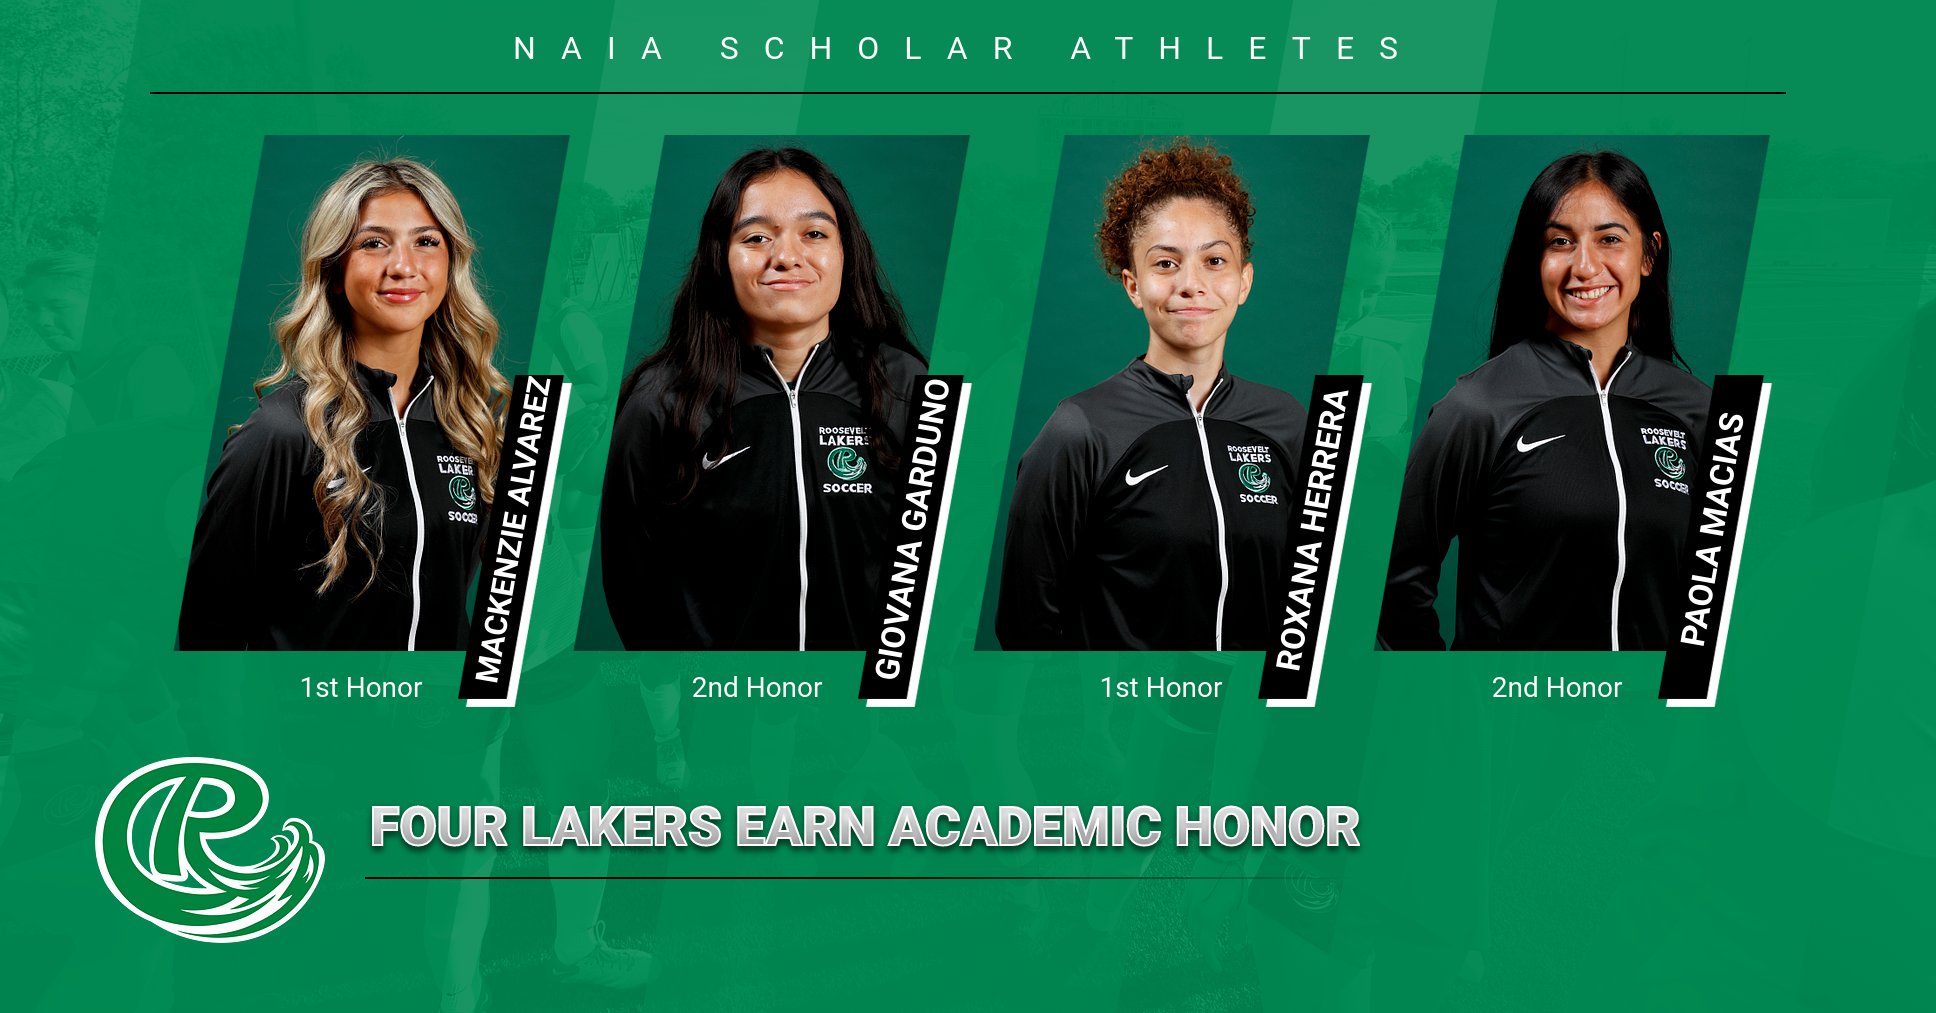 Four Lakers Named NAIA Scholar-Athletes From Women's Soccer